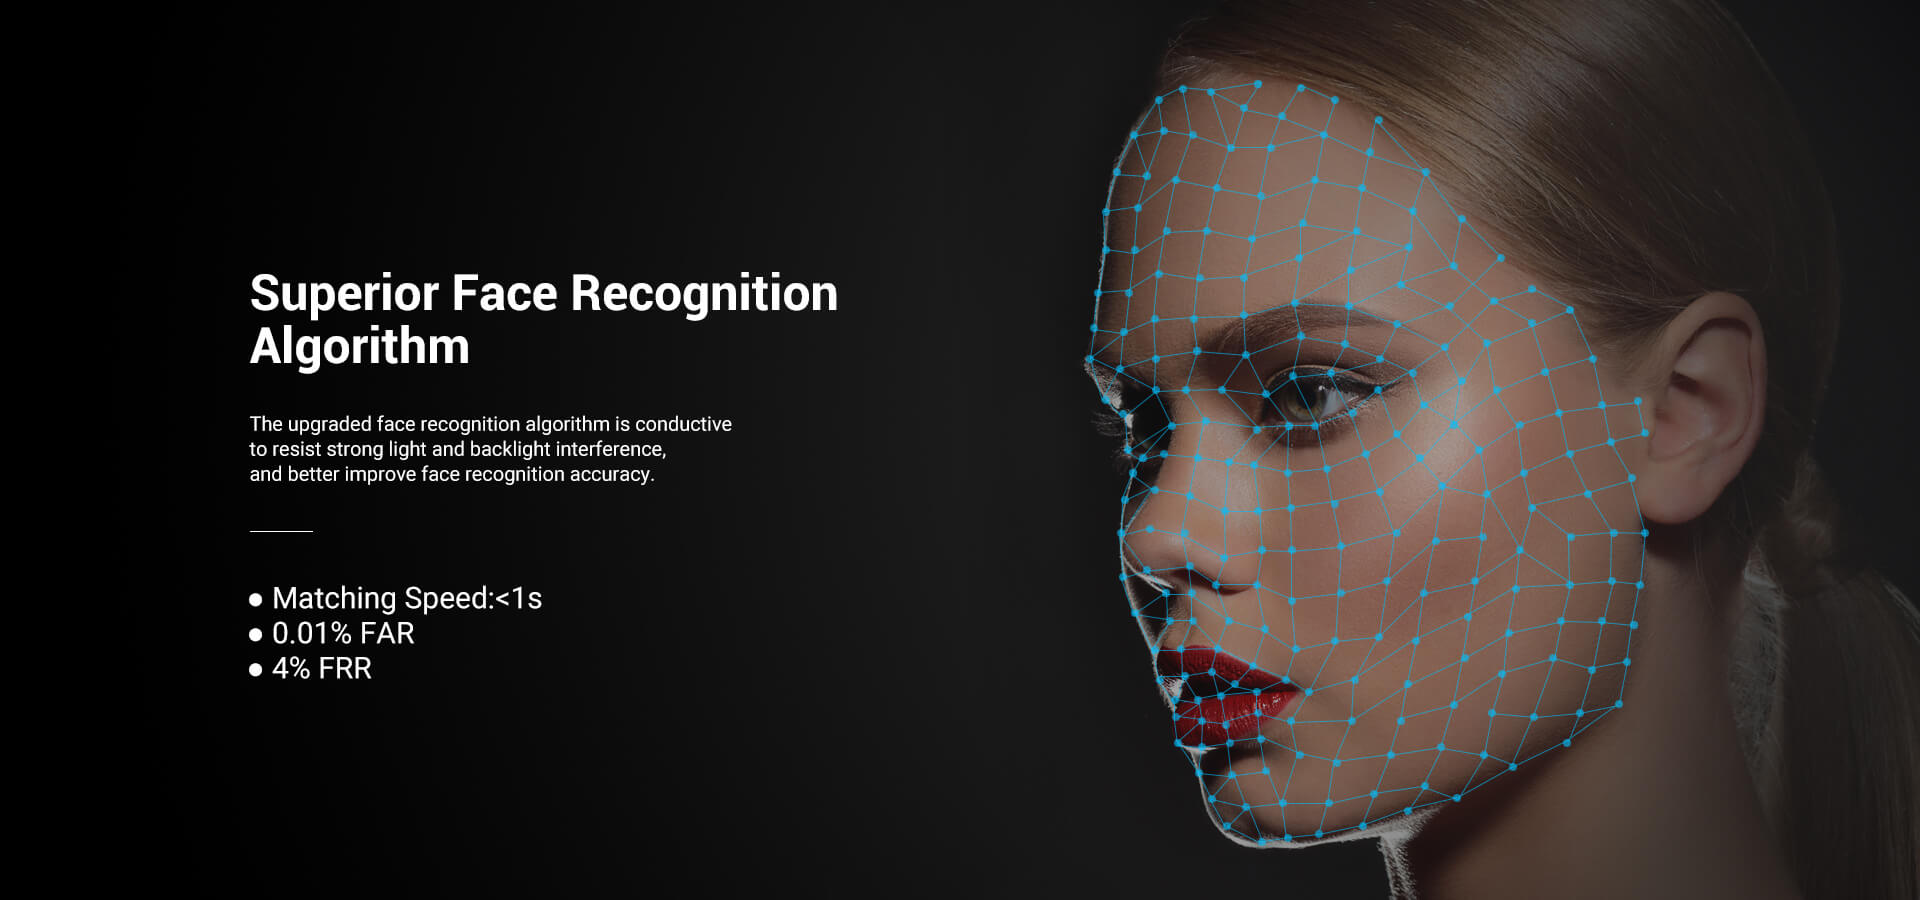  The upgraded face recognition algorithm is conductive to resist strong light and backlight interference, and better improve face recognition accuracy. 